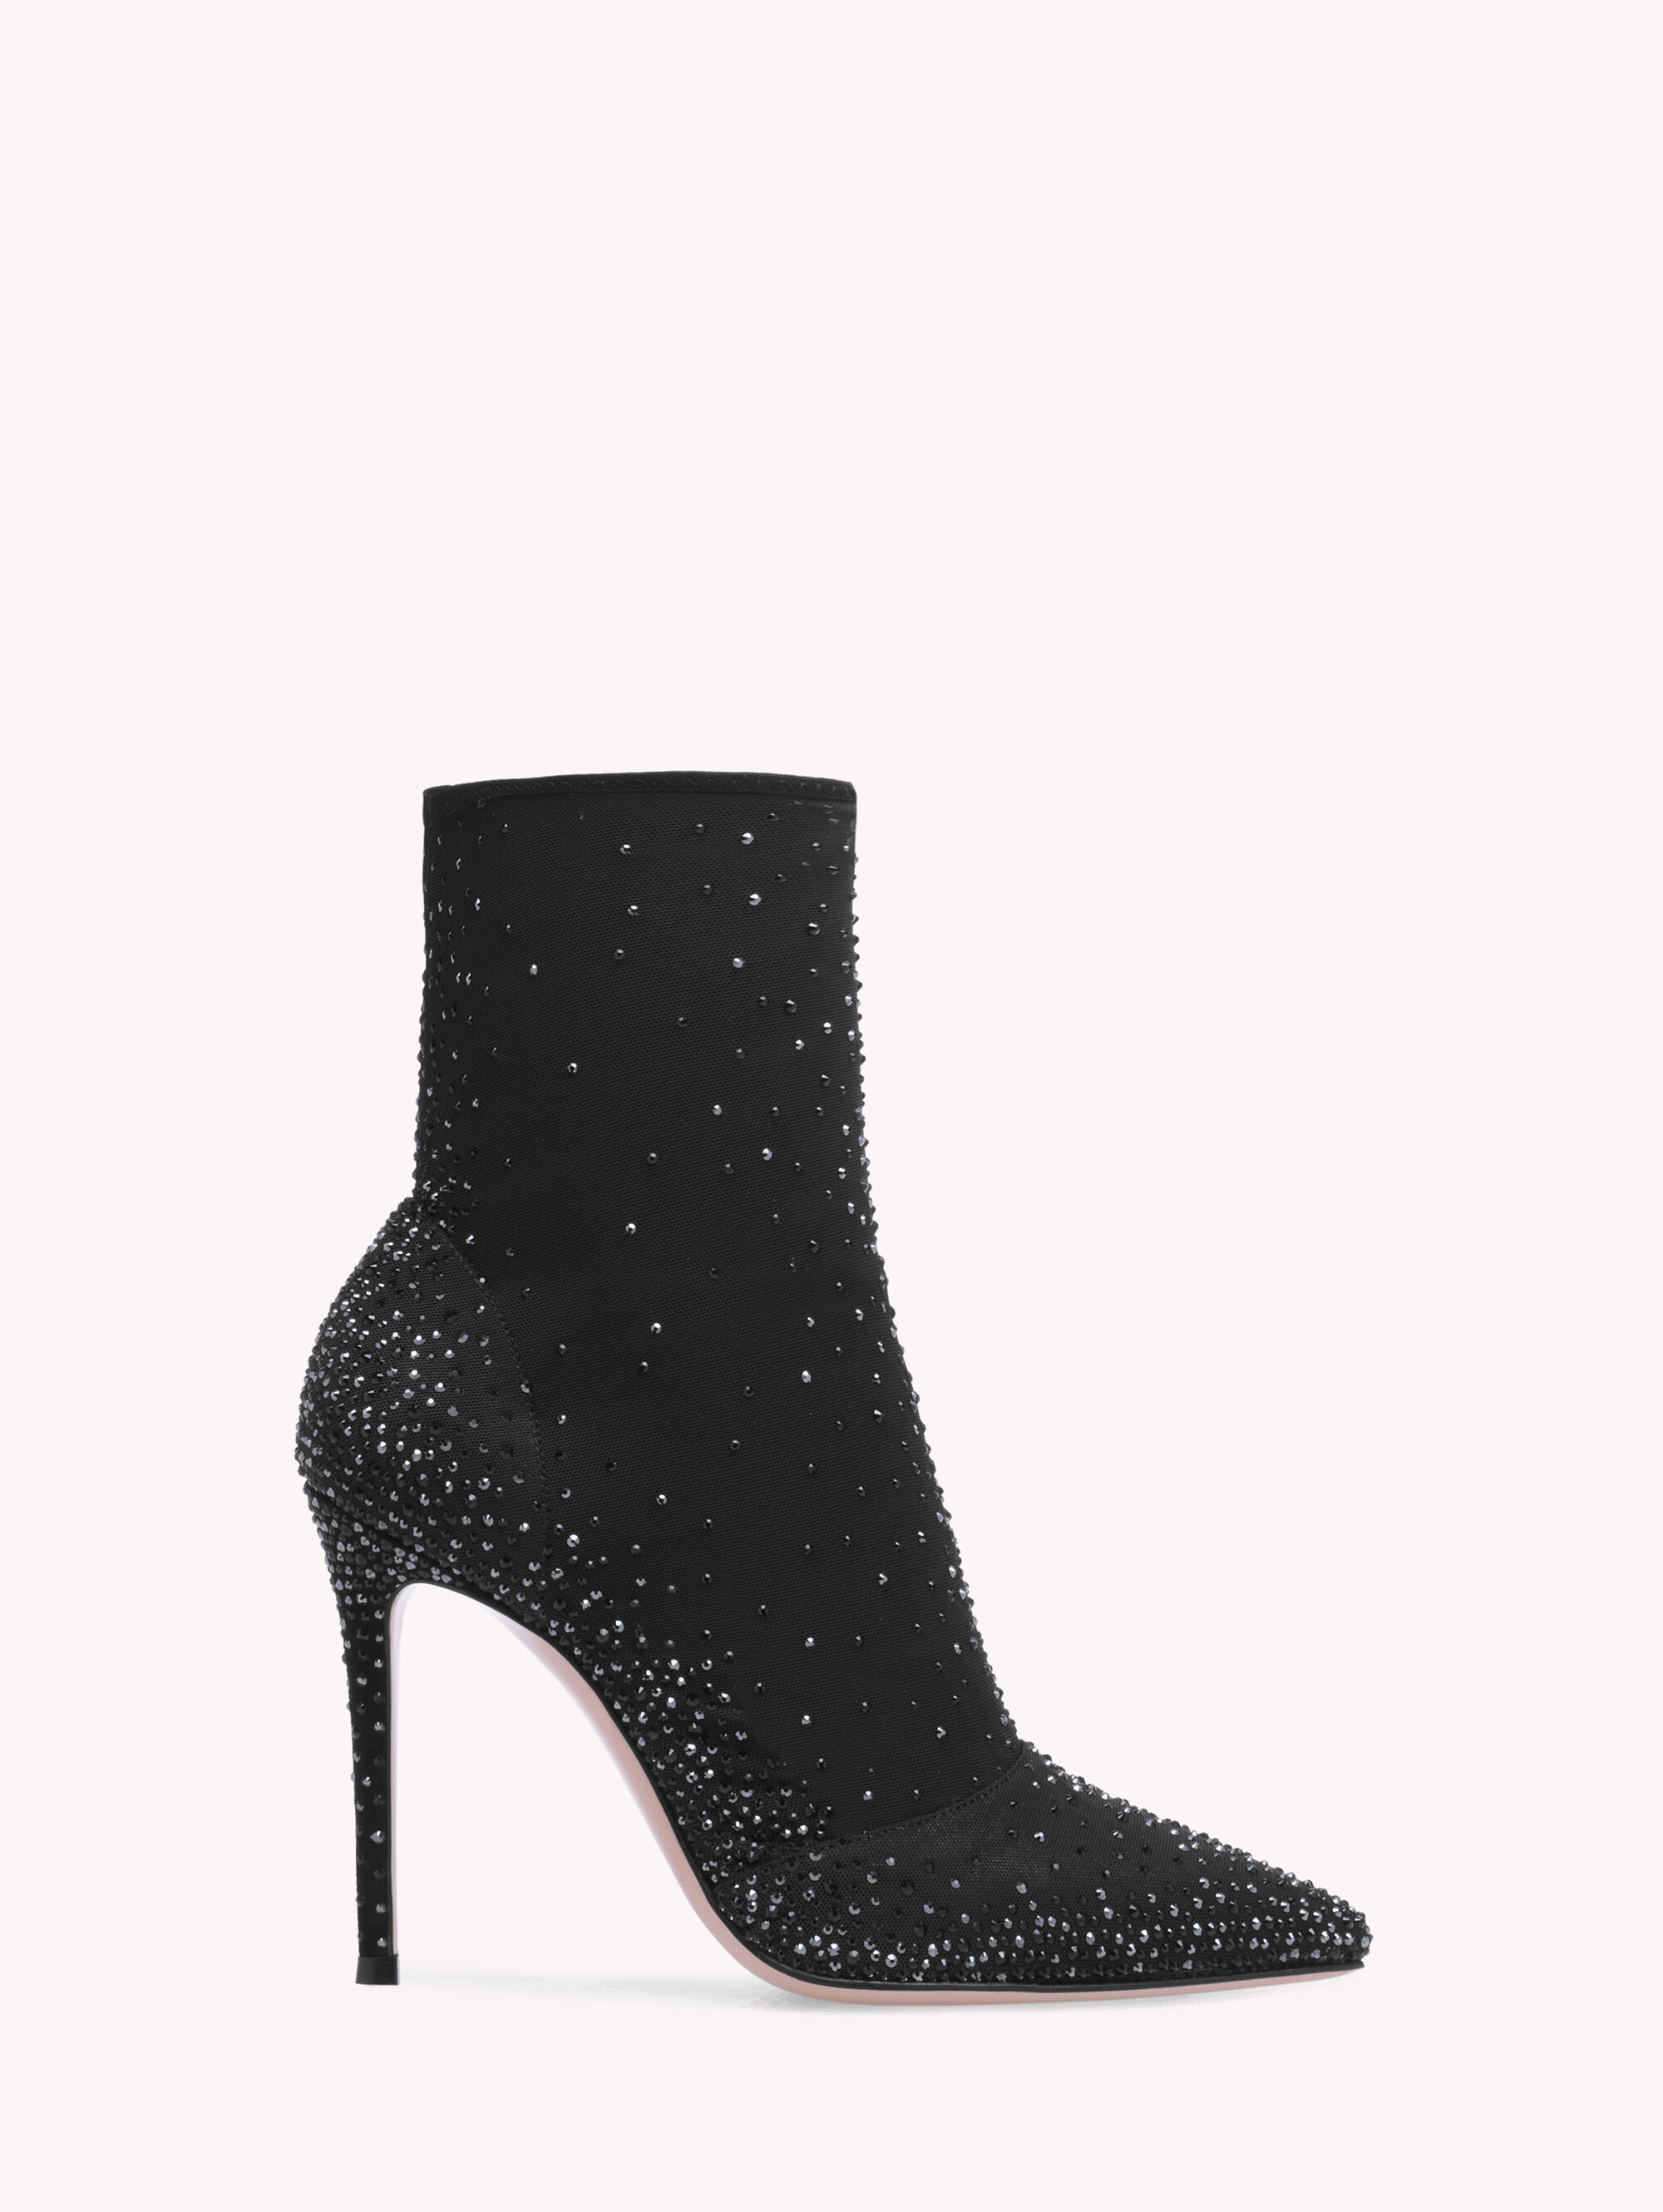 Ankle Boots for Women AURORA | Gianvito Rossi